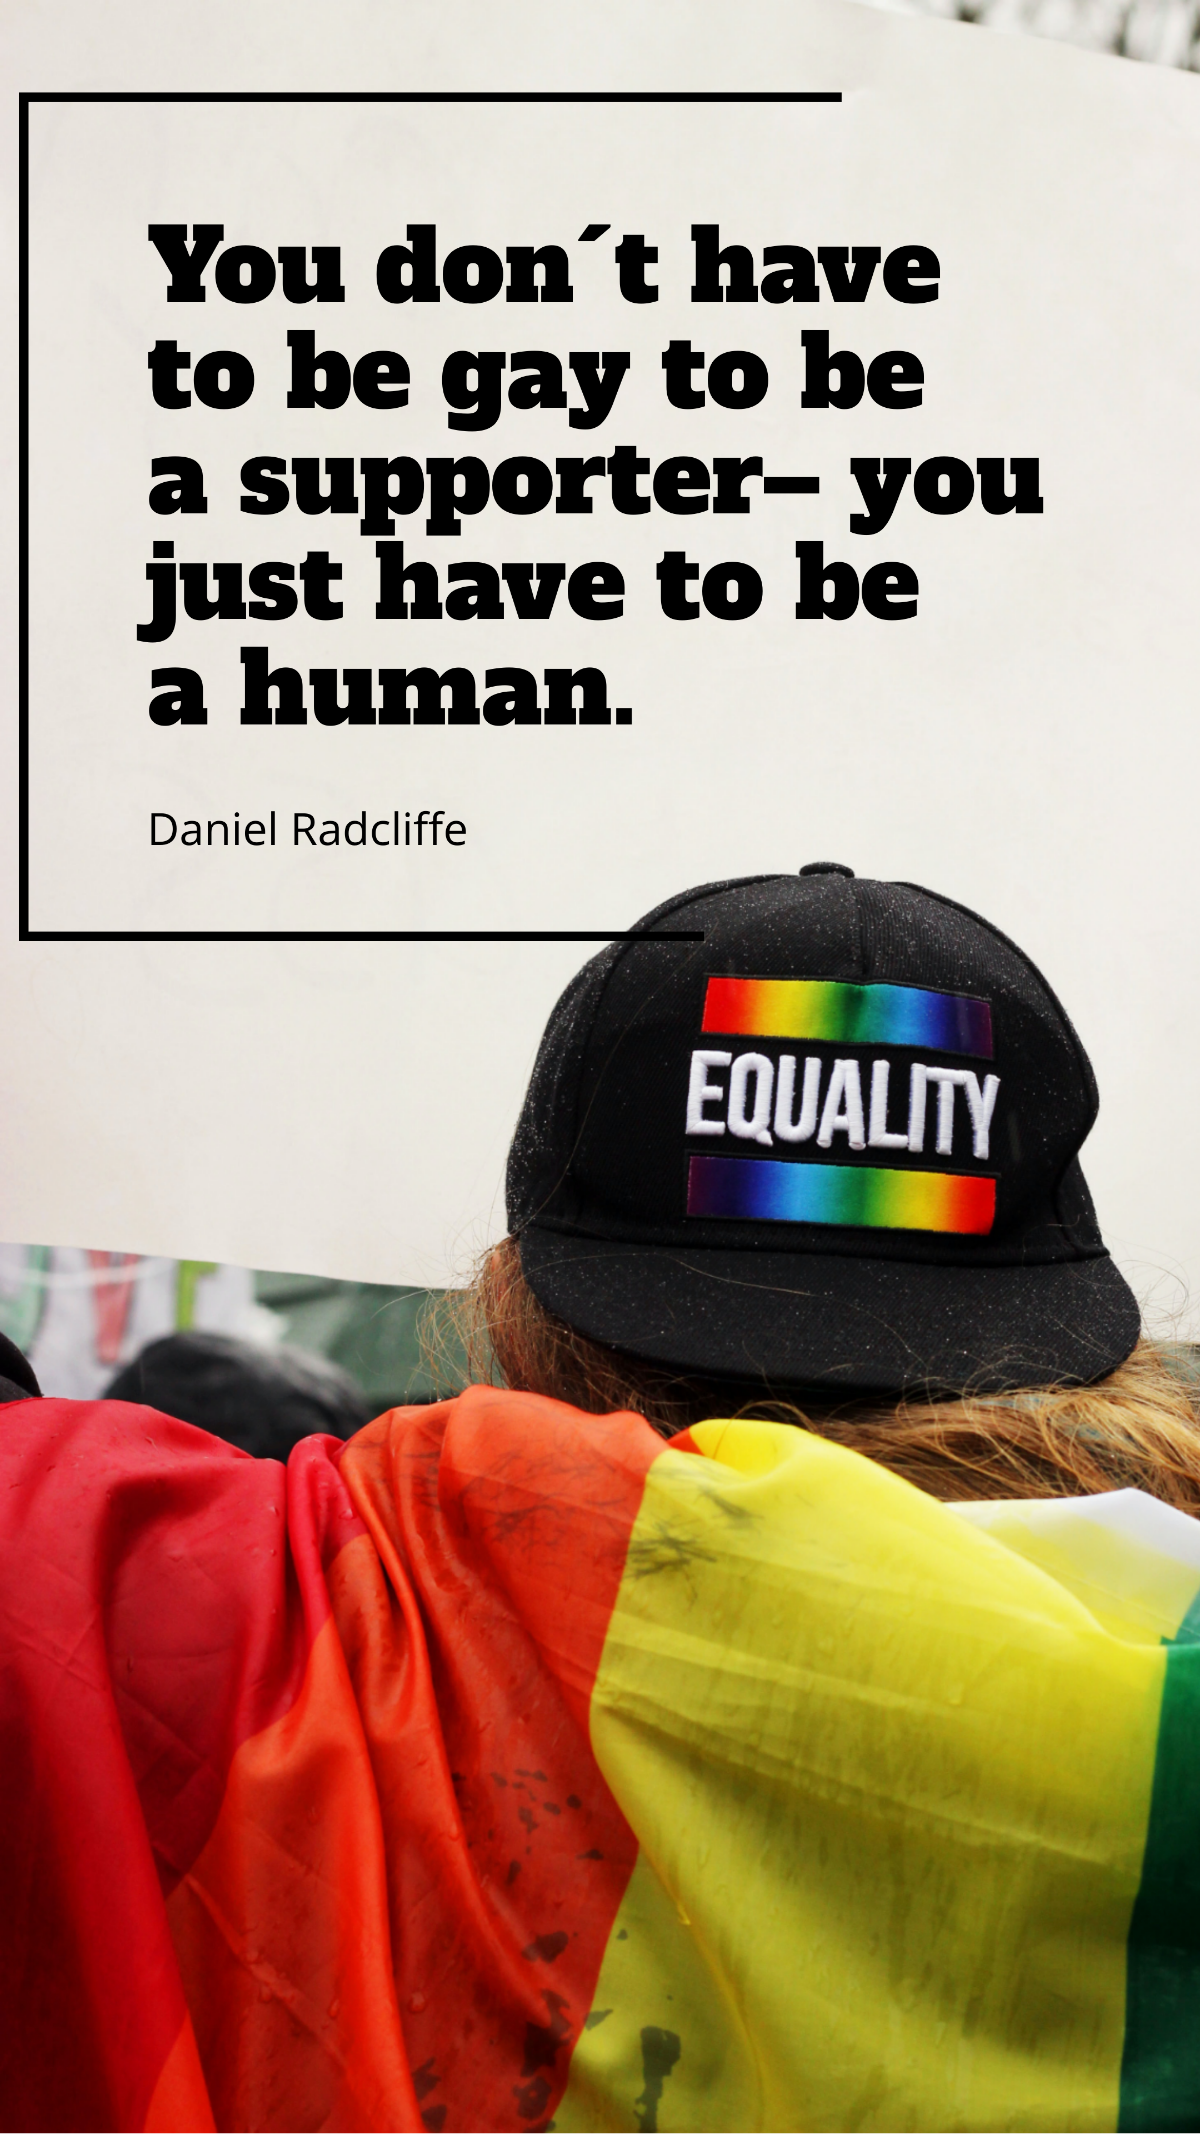 Daniel Radcliffe - You don´t have to be gay to be a supporter – you just have to be a human. Template